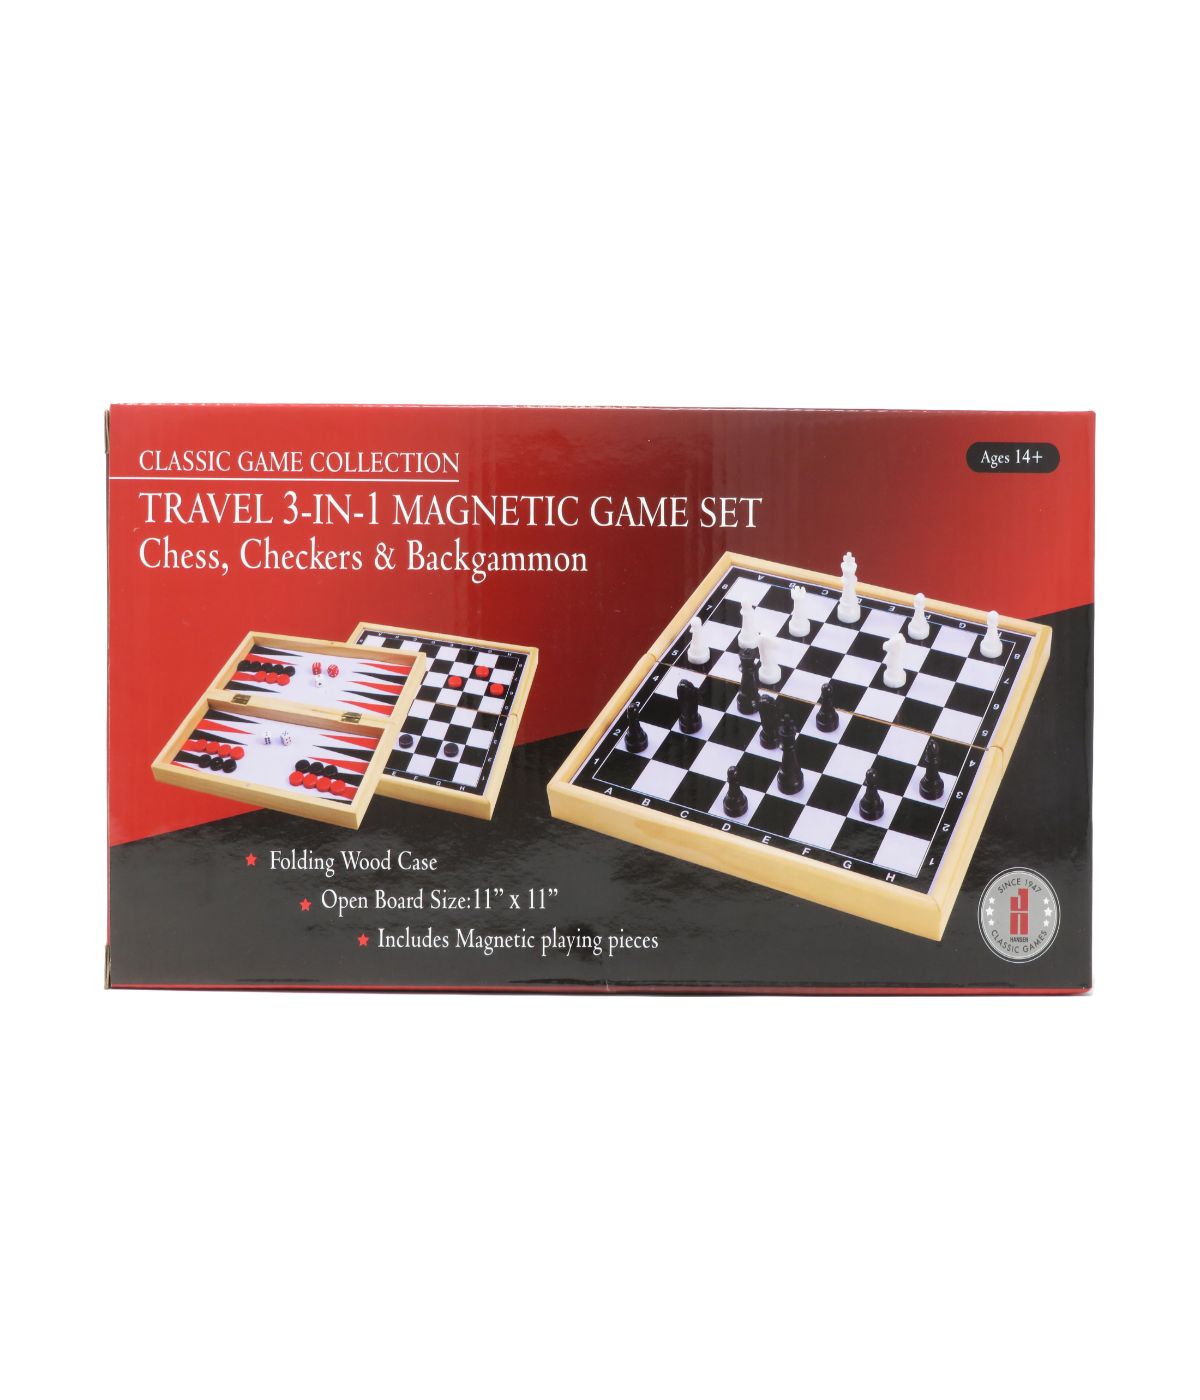 Classic Game Collection - Travel 3-in-1 Magnetic Game Set: Chess, Checkers & Backgammon Multi